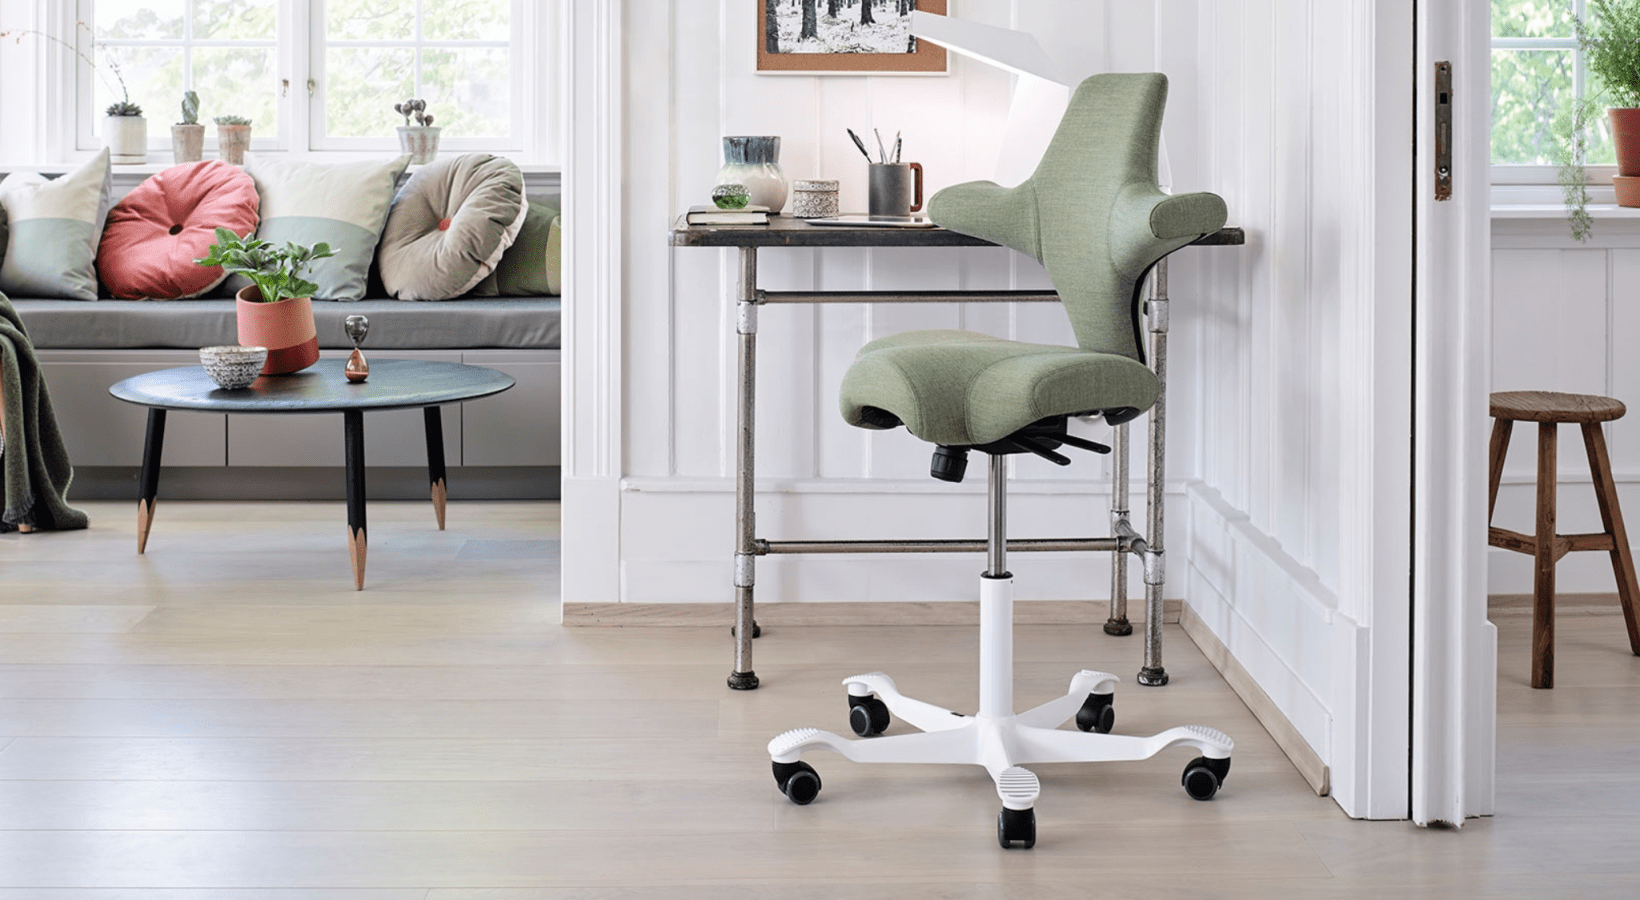 I am obsessed with the HAG Capisco Chair in green more than the kneeli